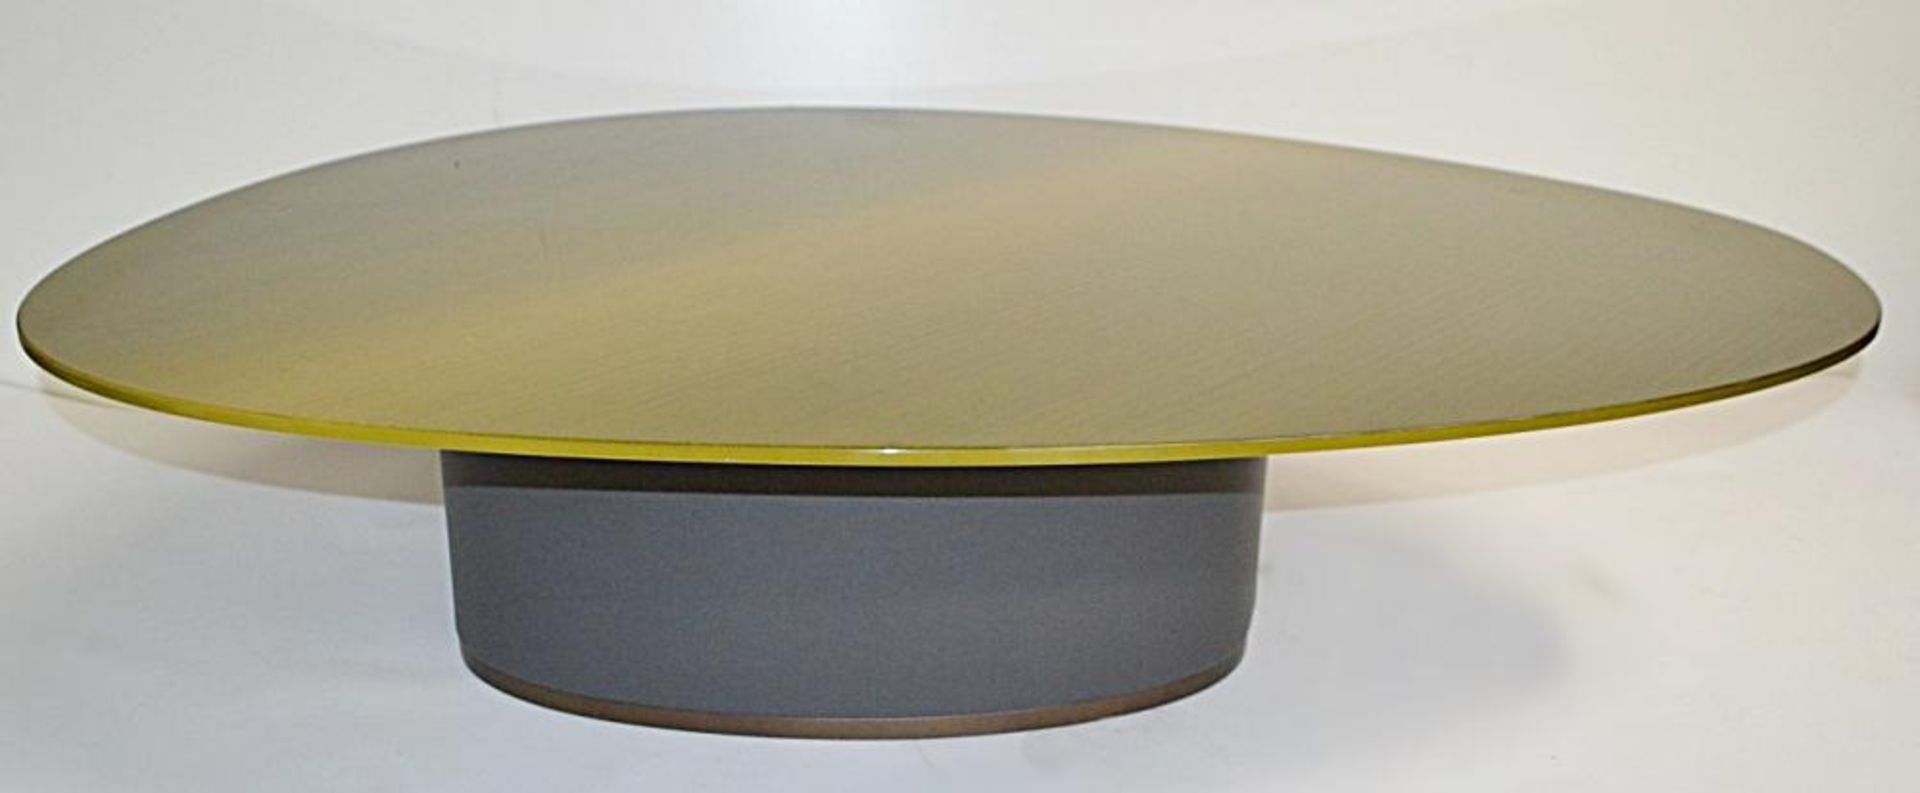 1 x Giorgetti 'Galet' Leather Upholstered Designer Table With A Lacquered Top - Image 2 of 5